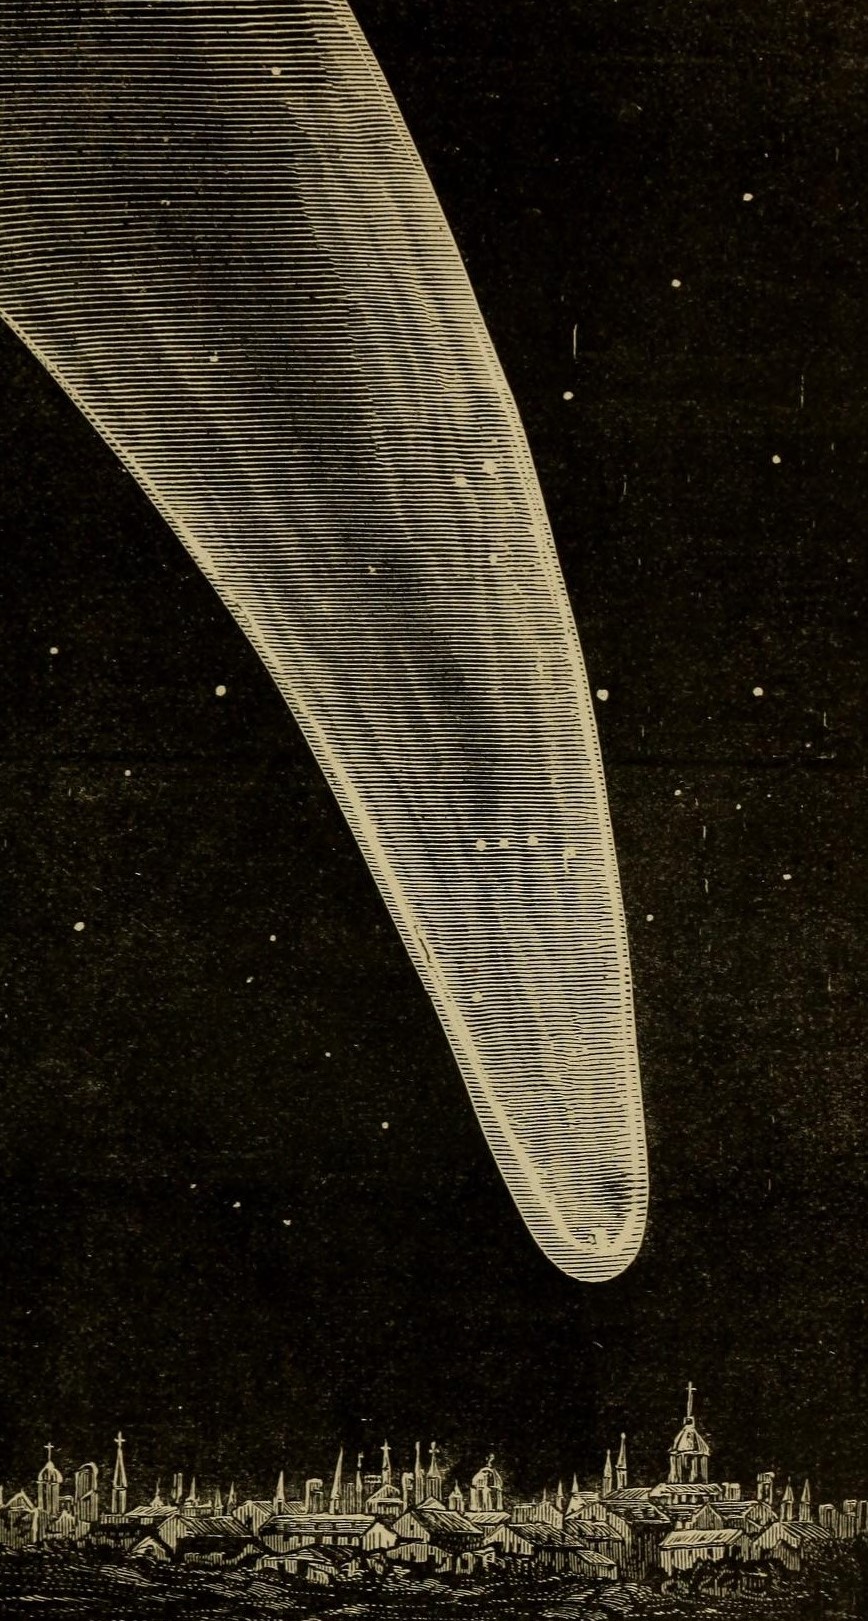 The Comet of 1811 Flowers of the Sky by Richard A. Proctor (1879)